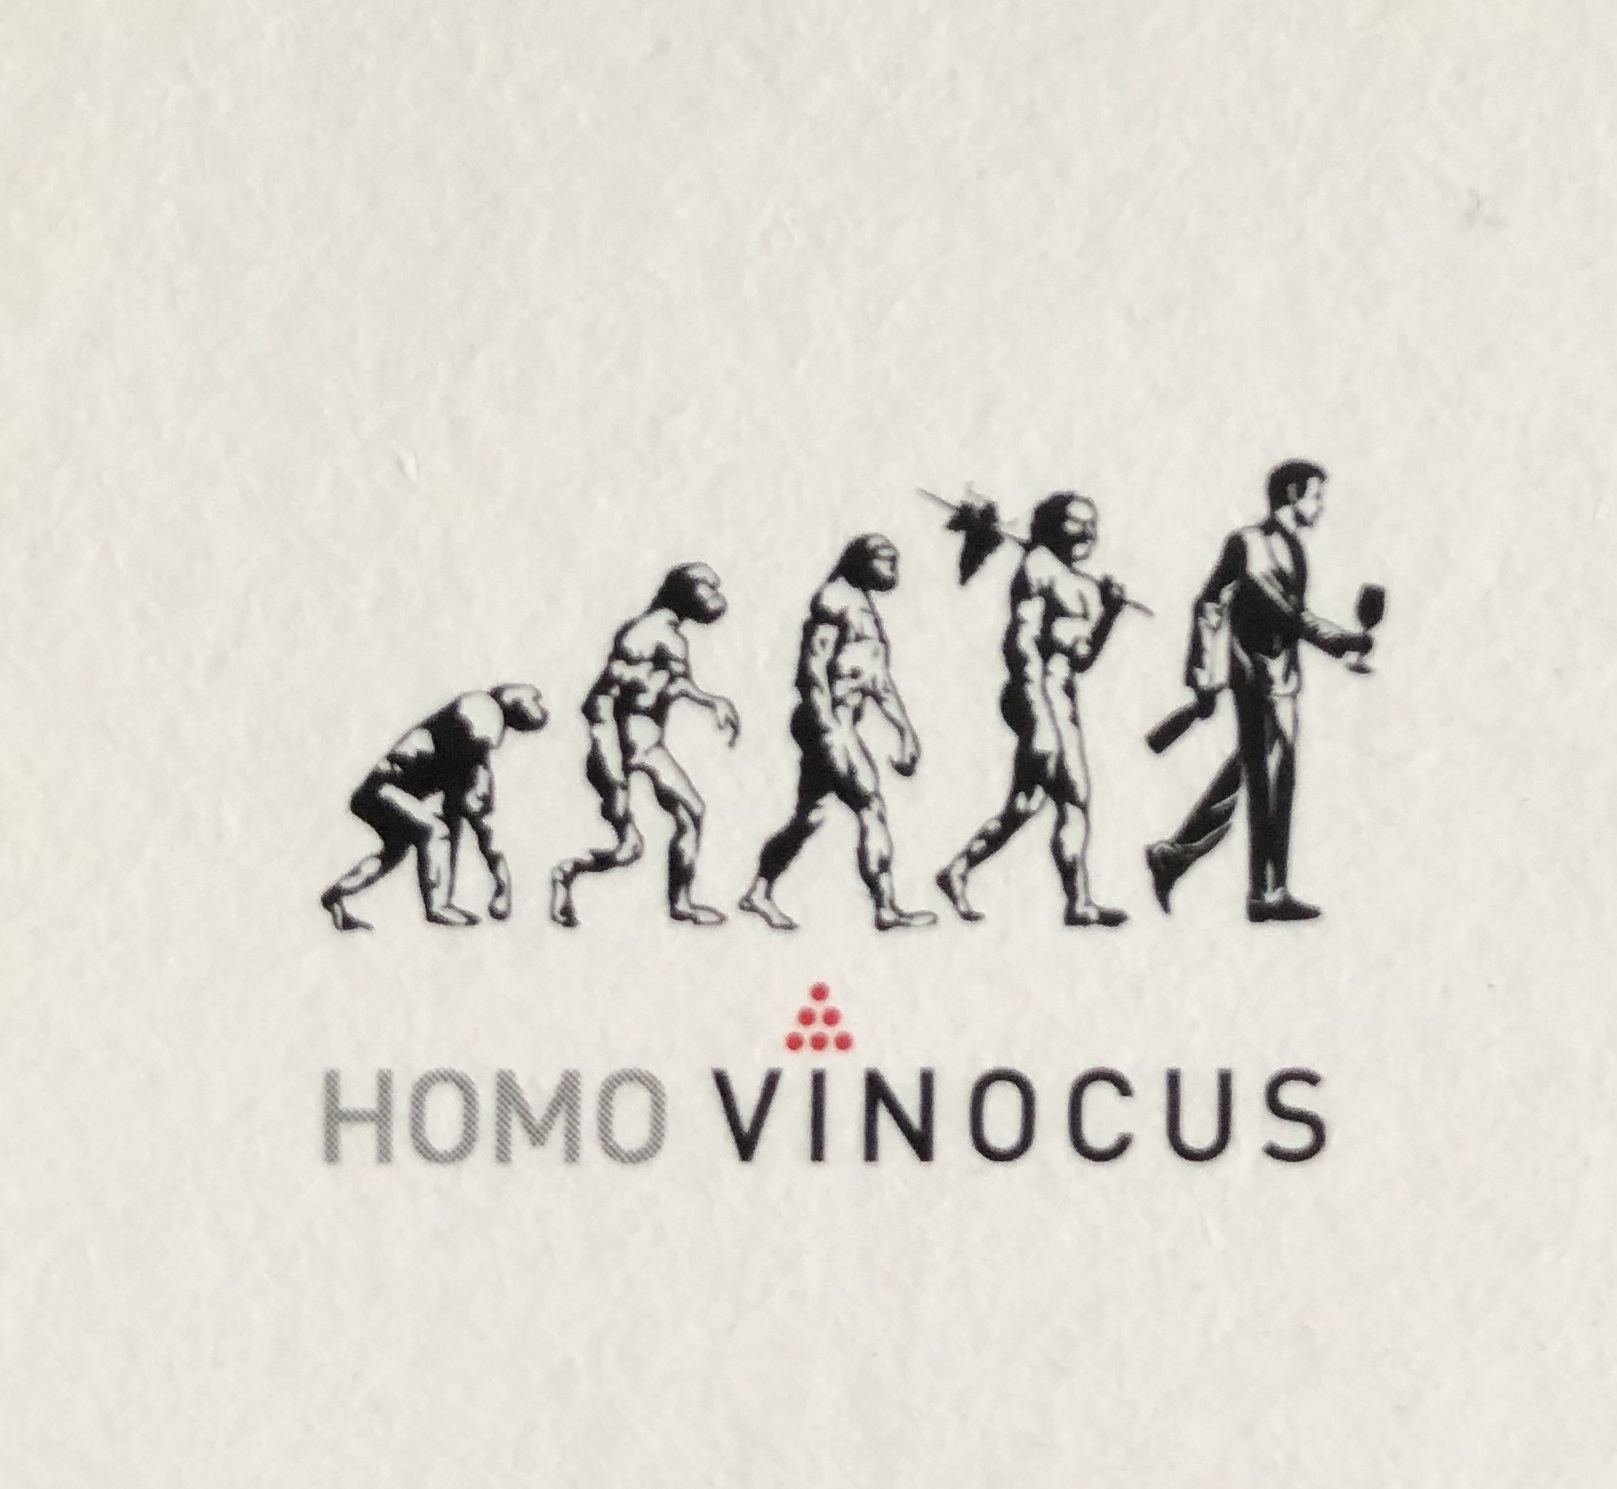 You are currently viewing Vinocus